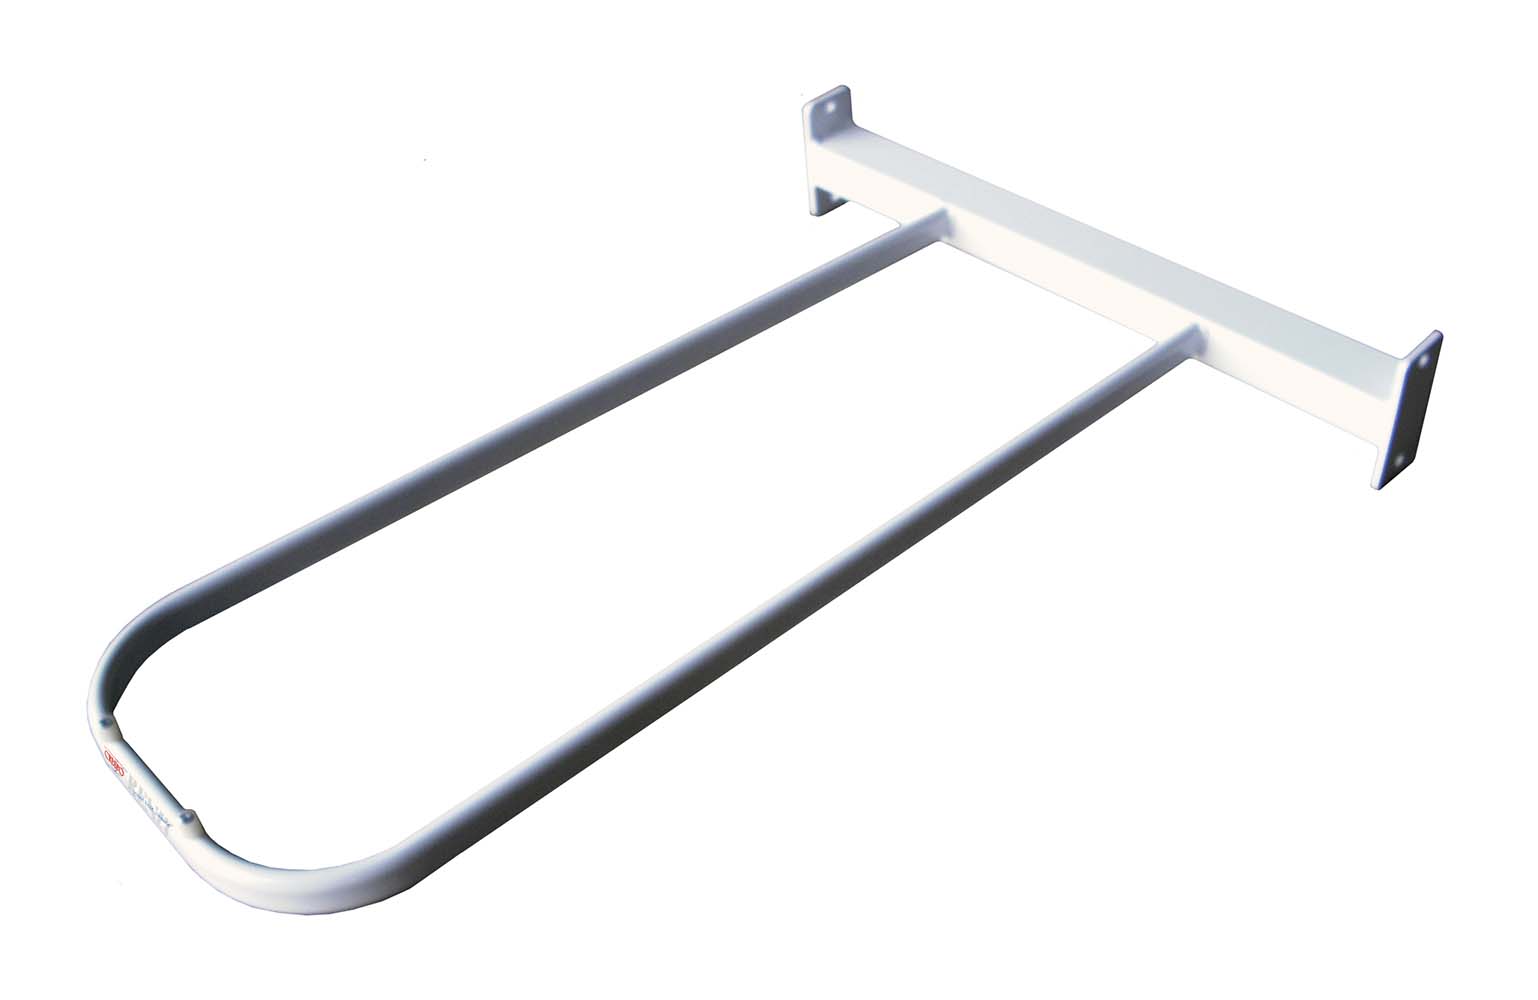 1149155 An accessory bar for the 2/3 layer display for Crespo chairs. This bar connects 2 displays and has room for accessories such as Crespo stools AL-302, footstools R-209 R-215. This bar also creates the option of hanging approximately 1 extra Crespo chairs.